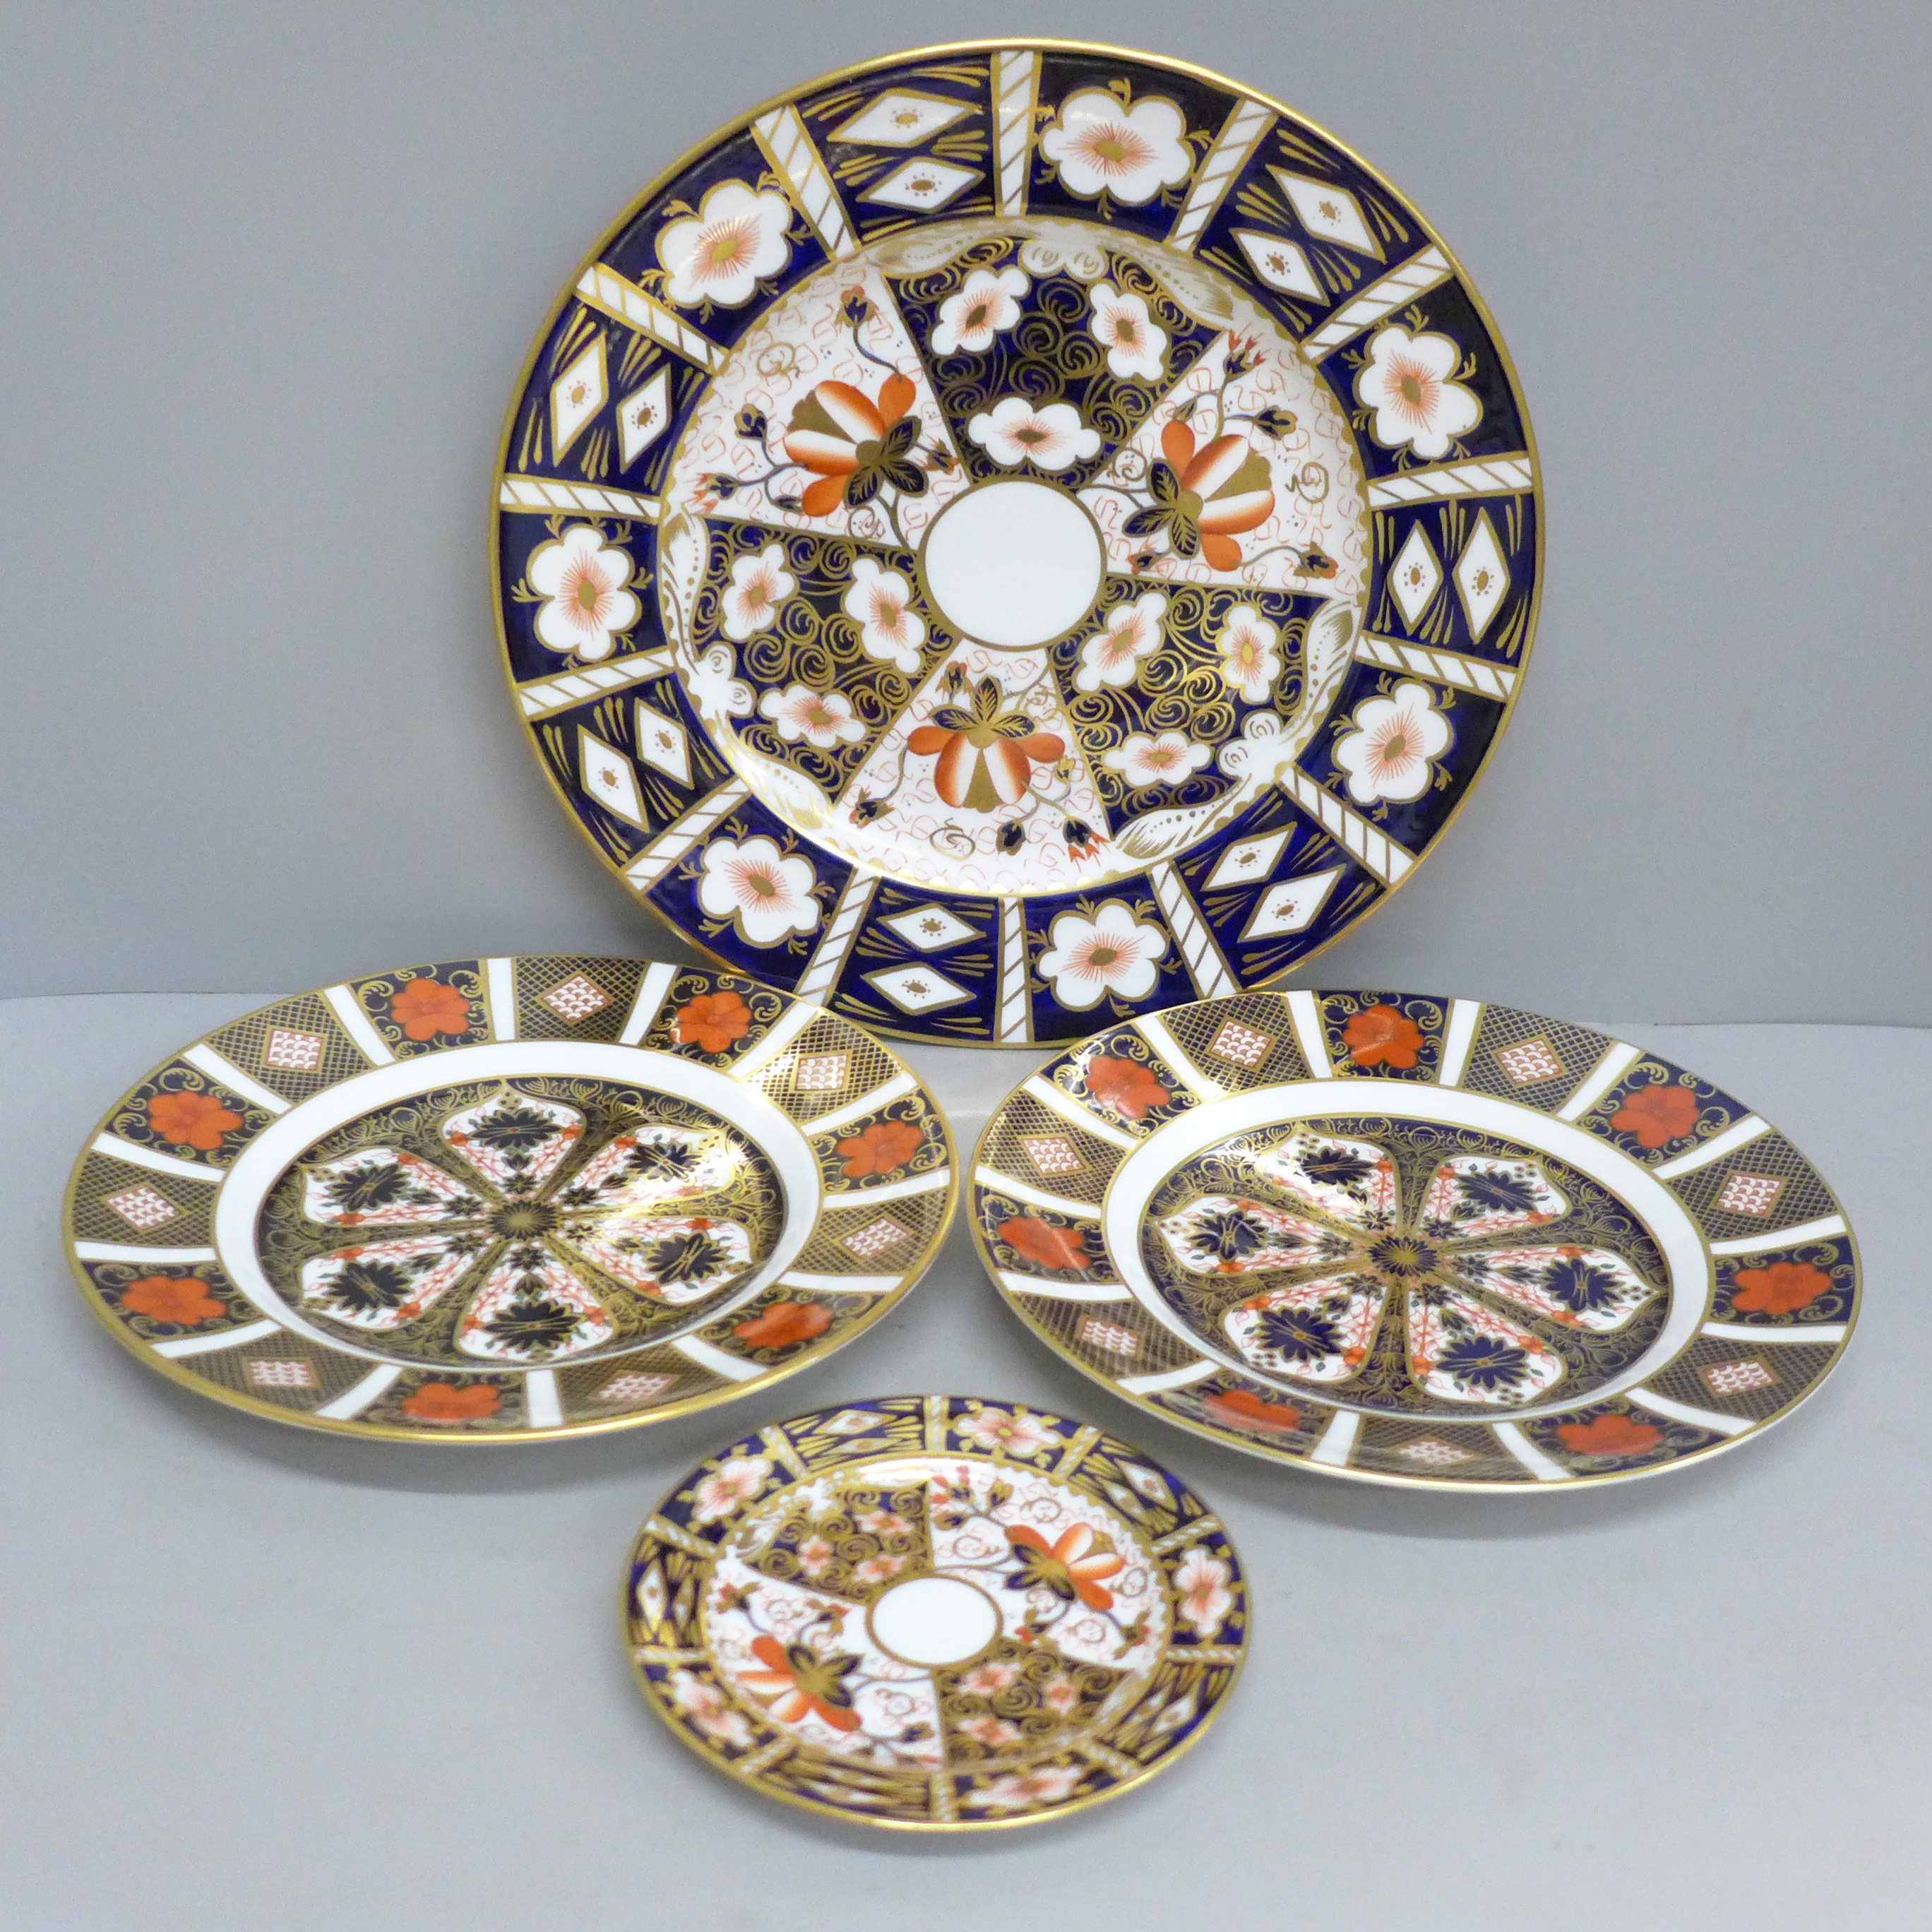 Four items of Royal Crown Derby, a 2451 dinner plate, pin dish and a pair of 1128 side plates (one